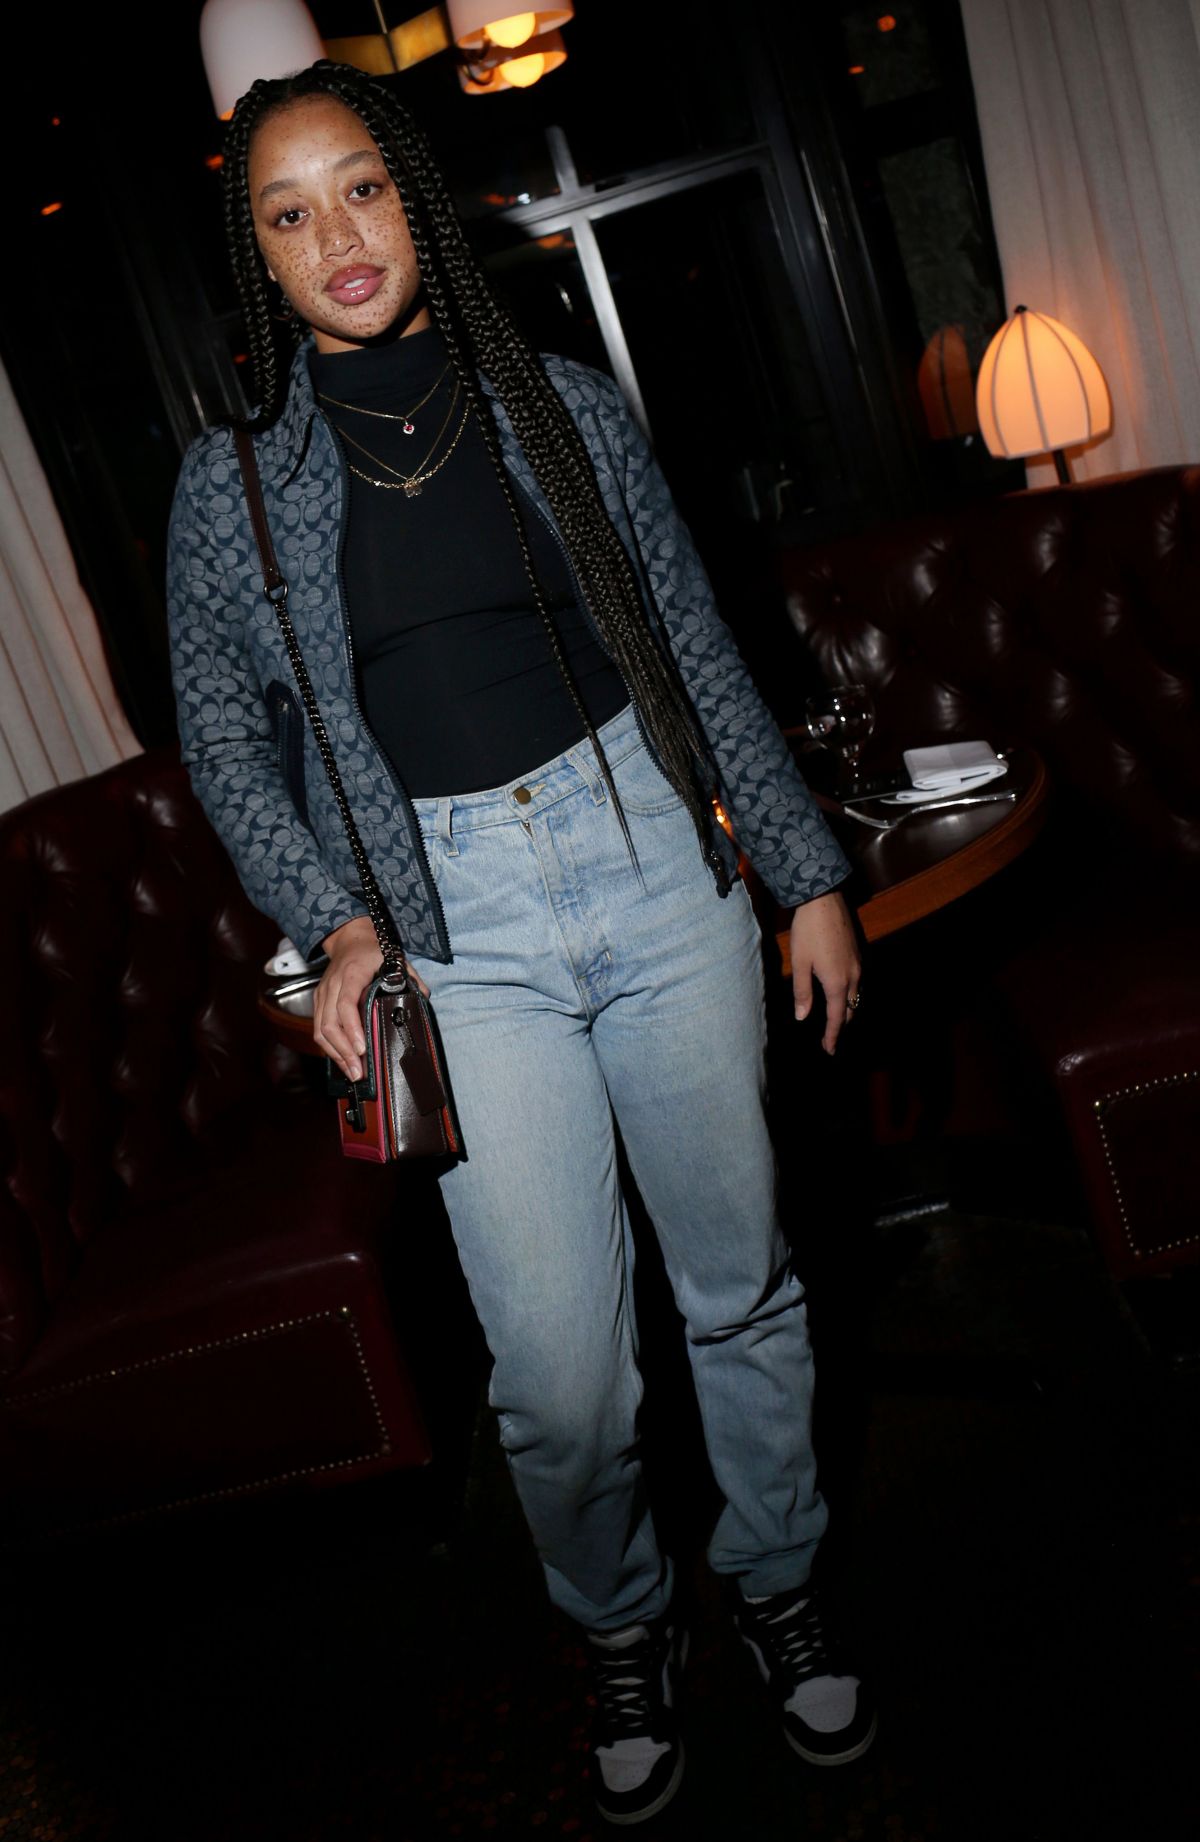 SALEM MITCHELL at Coach Show Afterparty at New York Fashion Week 02/11 ...